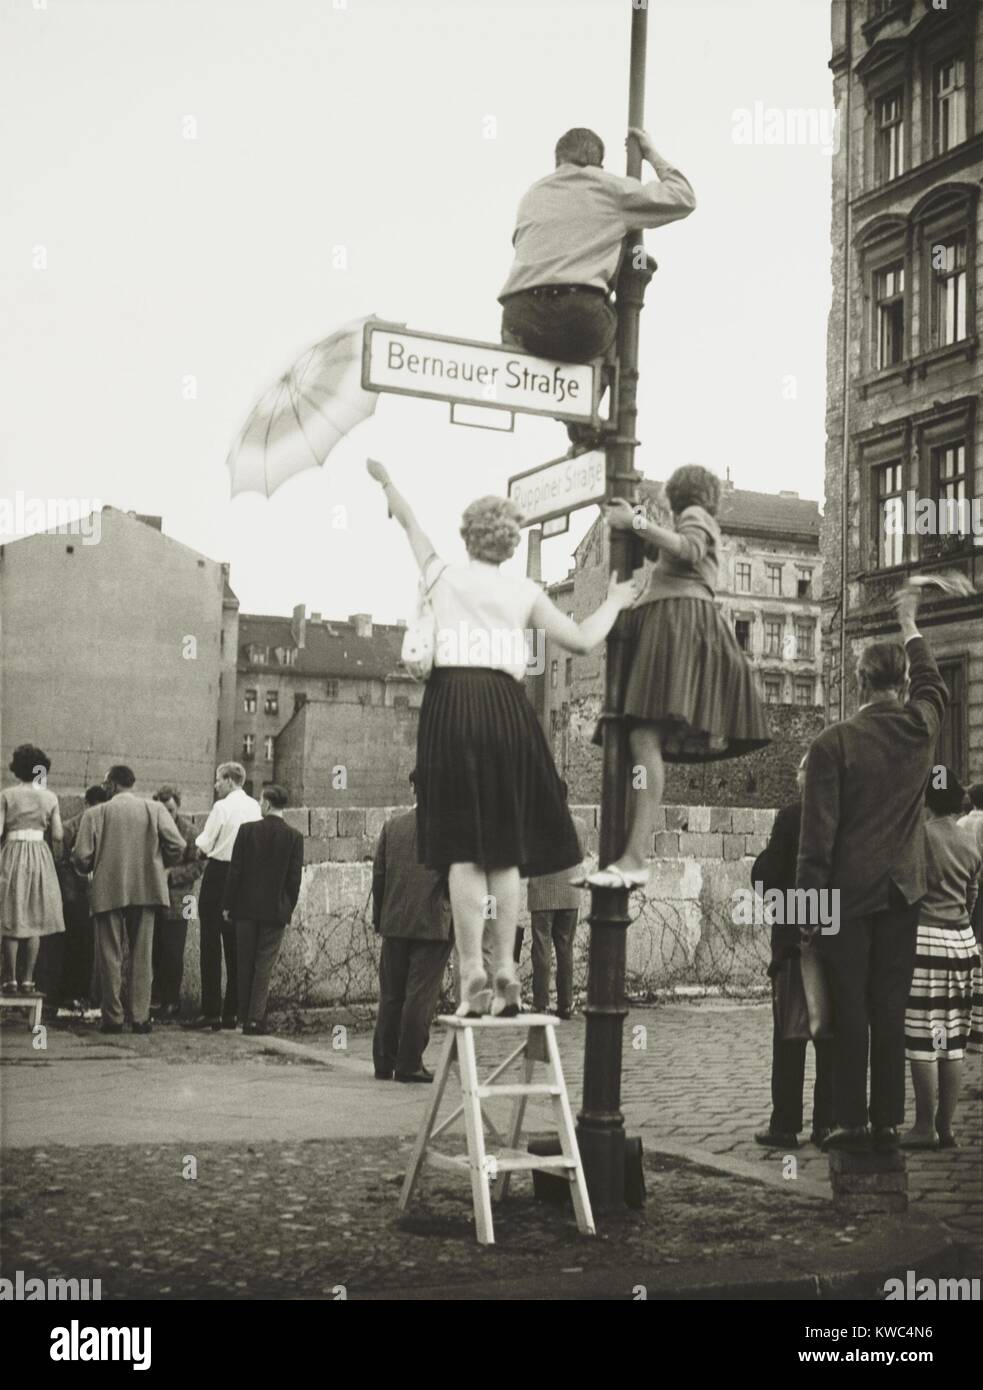 West Berliners in the French sector waved to friends and relatives in East Berlin. At Bernauer Strasse they used small ladders, lampposts, and bricks to get a better view across the Berlin Wall. Eventually the East German 'VOPOS' (People's Police) tossed tear gas grenades over the border barrier to break up the gathering. Sept. 13, 1961. (BSLOC 2015 2 264) Stock Photo